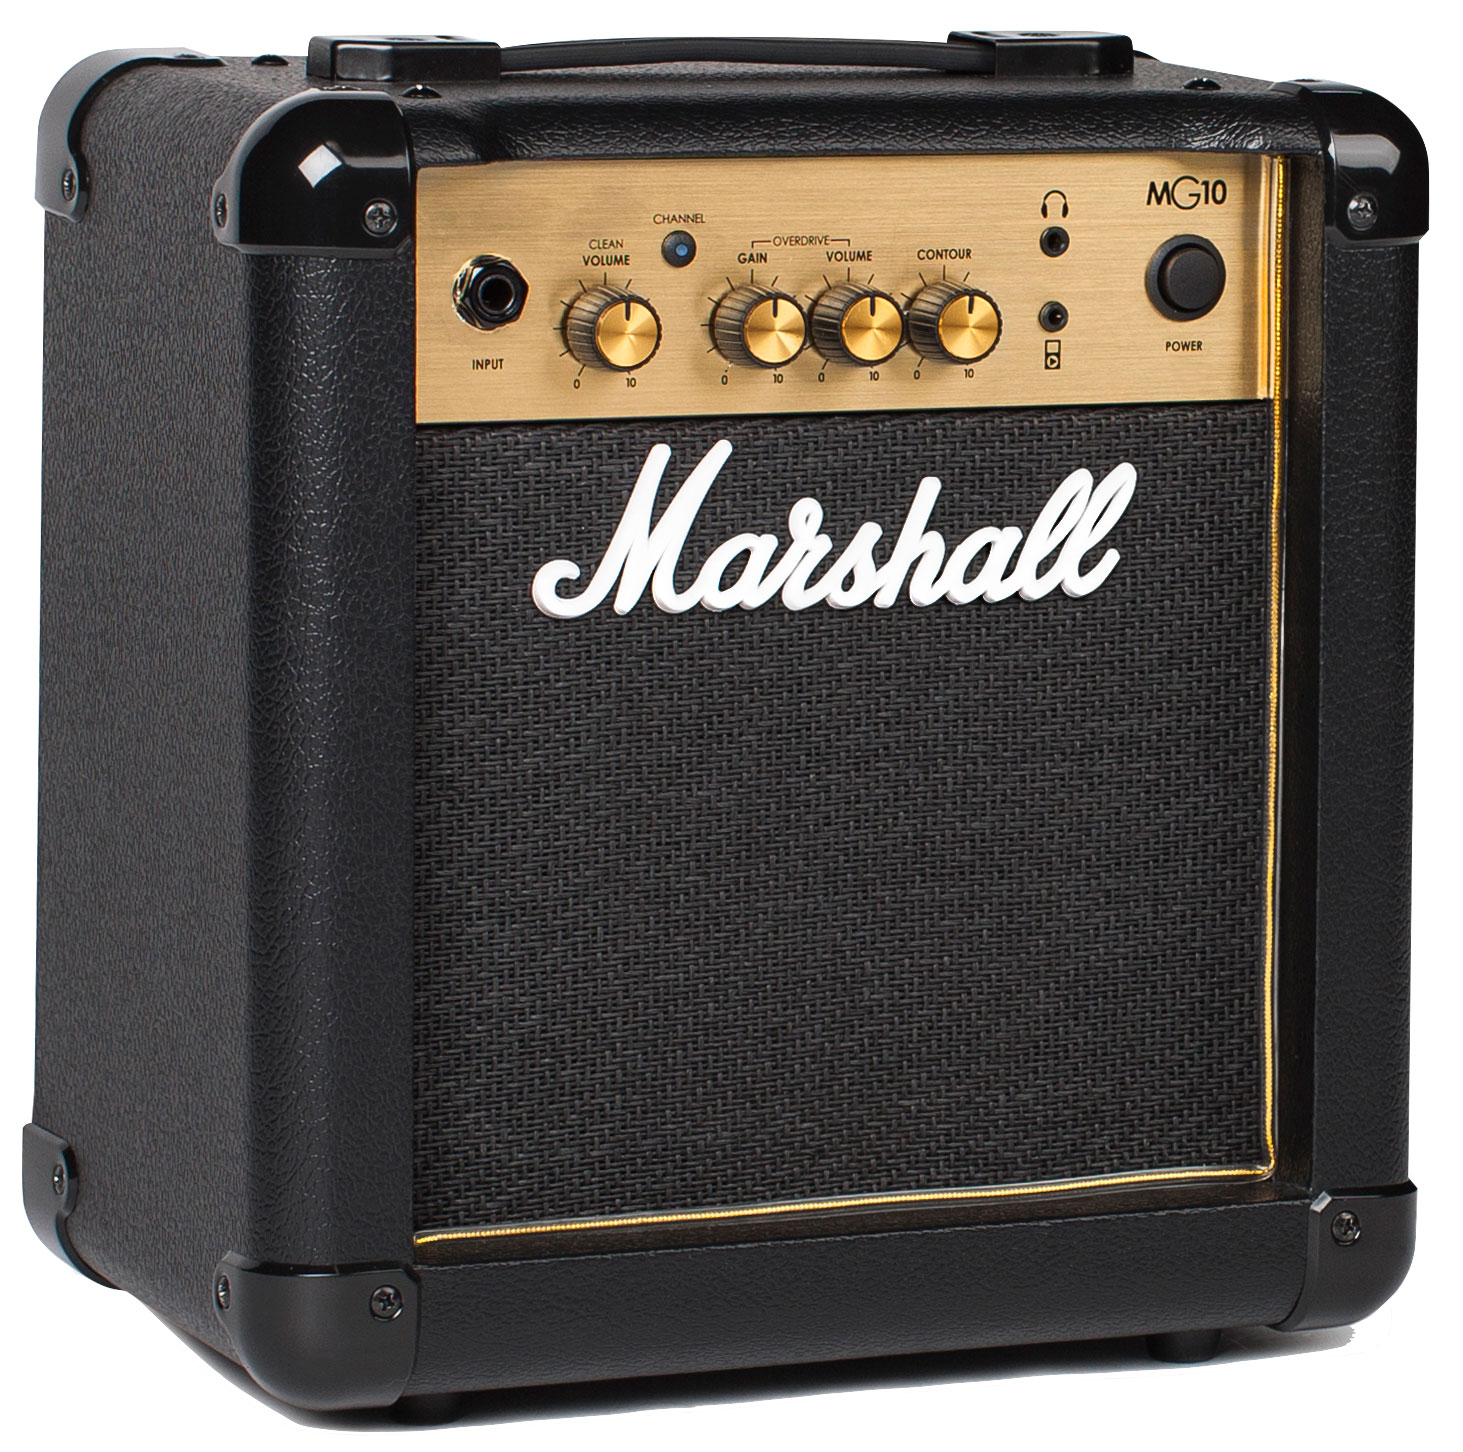 Eastone Sdc70 +marshall Mg10g Gold +cable +housse +courroie +mediators - Red - Pack Guitare Électrique - Variation 6